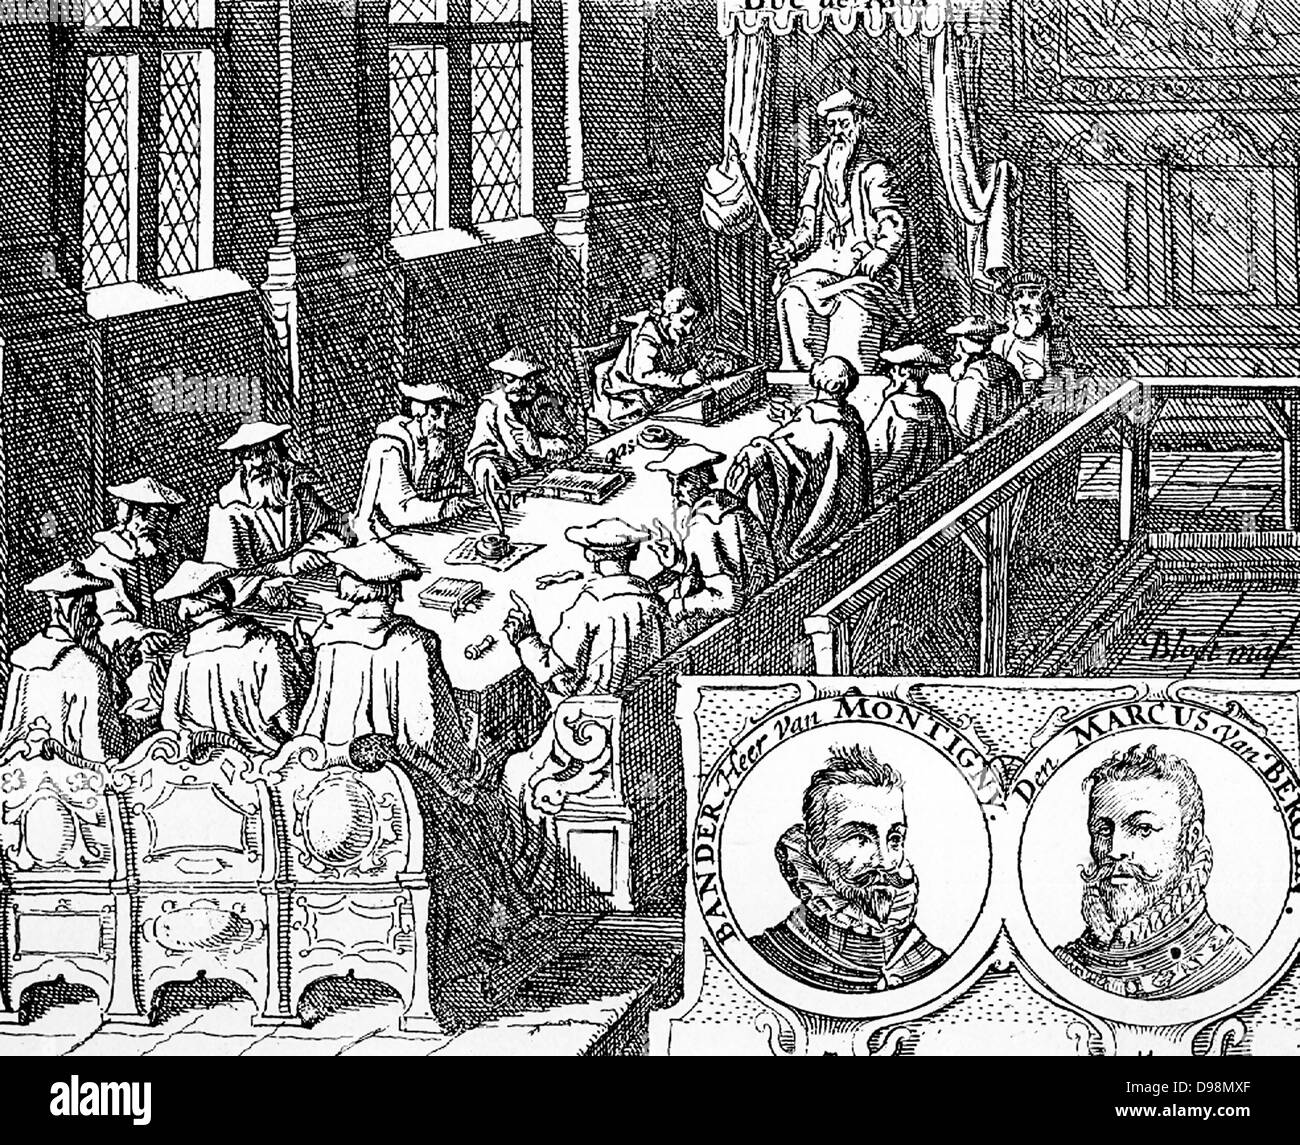 In the right hand corner of this panel are shown the Marquis of Bergen and the Baron de Montigny, who in 1566 were sent as ambassadors to Spain to discuss the petition and the moderation of placcaten to speak.  They never saw their land again. Stock Photo